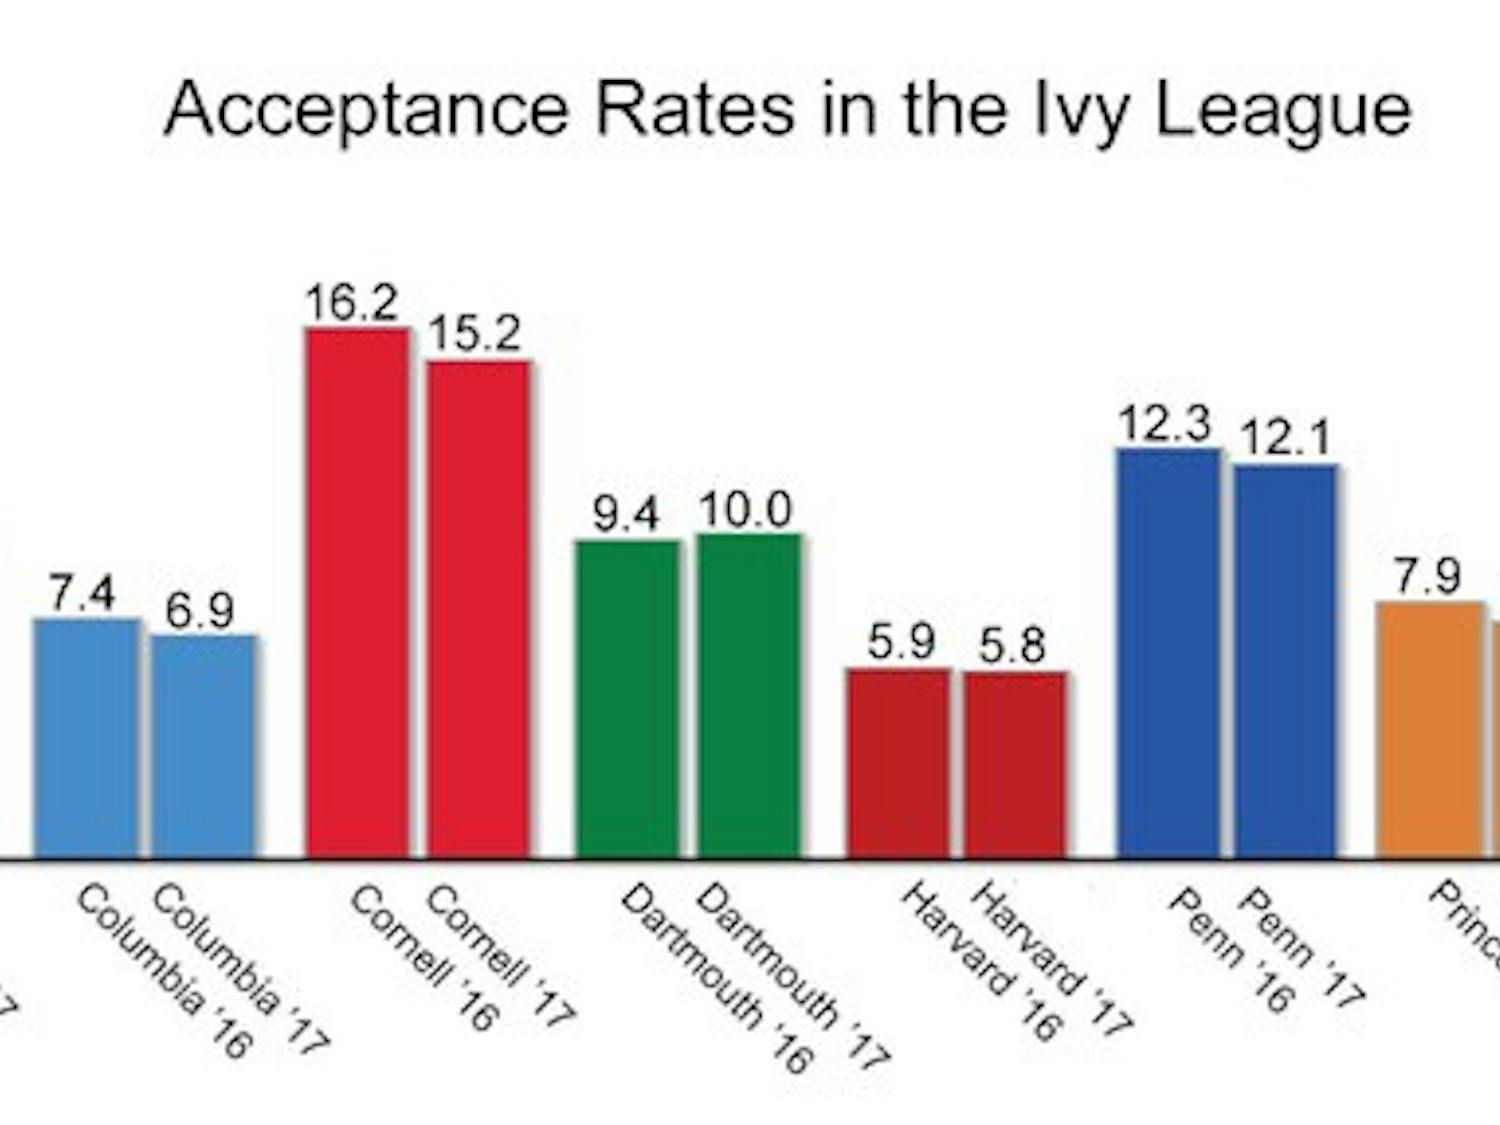 Dartmouth was the only Ivy League school to see an increase in acceptance rate this year.